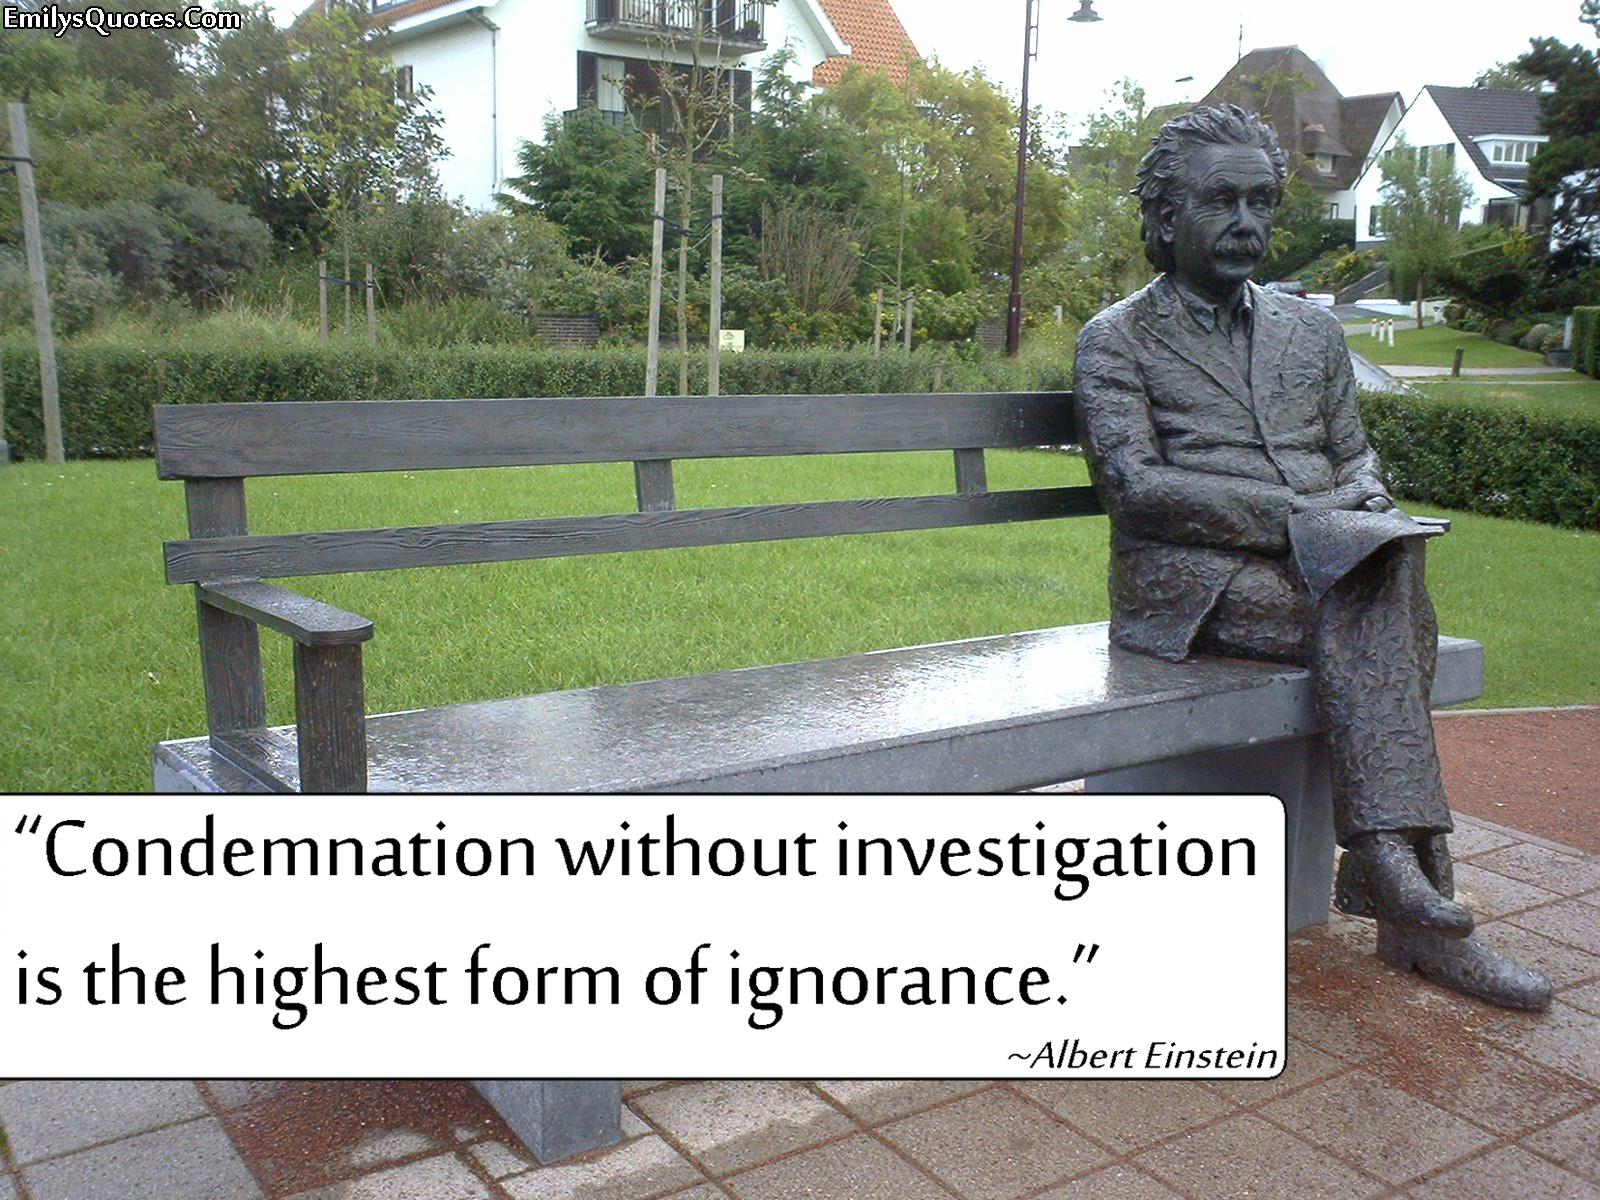 Condemnation without investigation is the highest form of ignorance